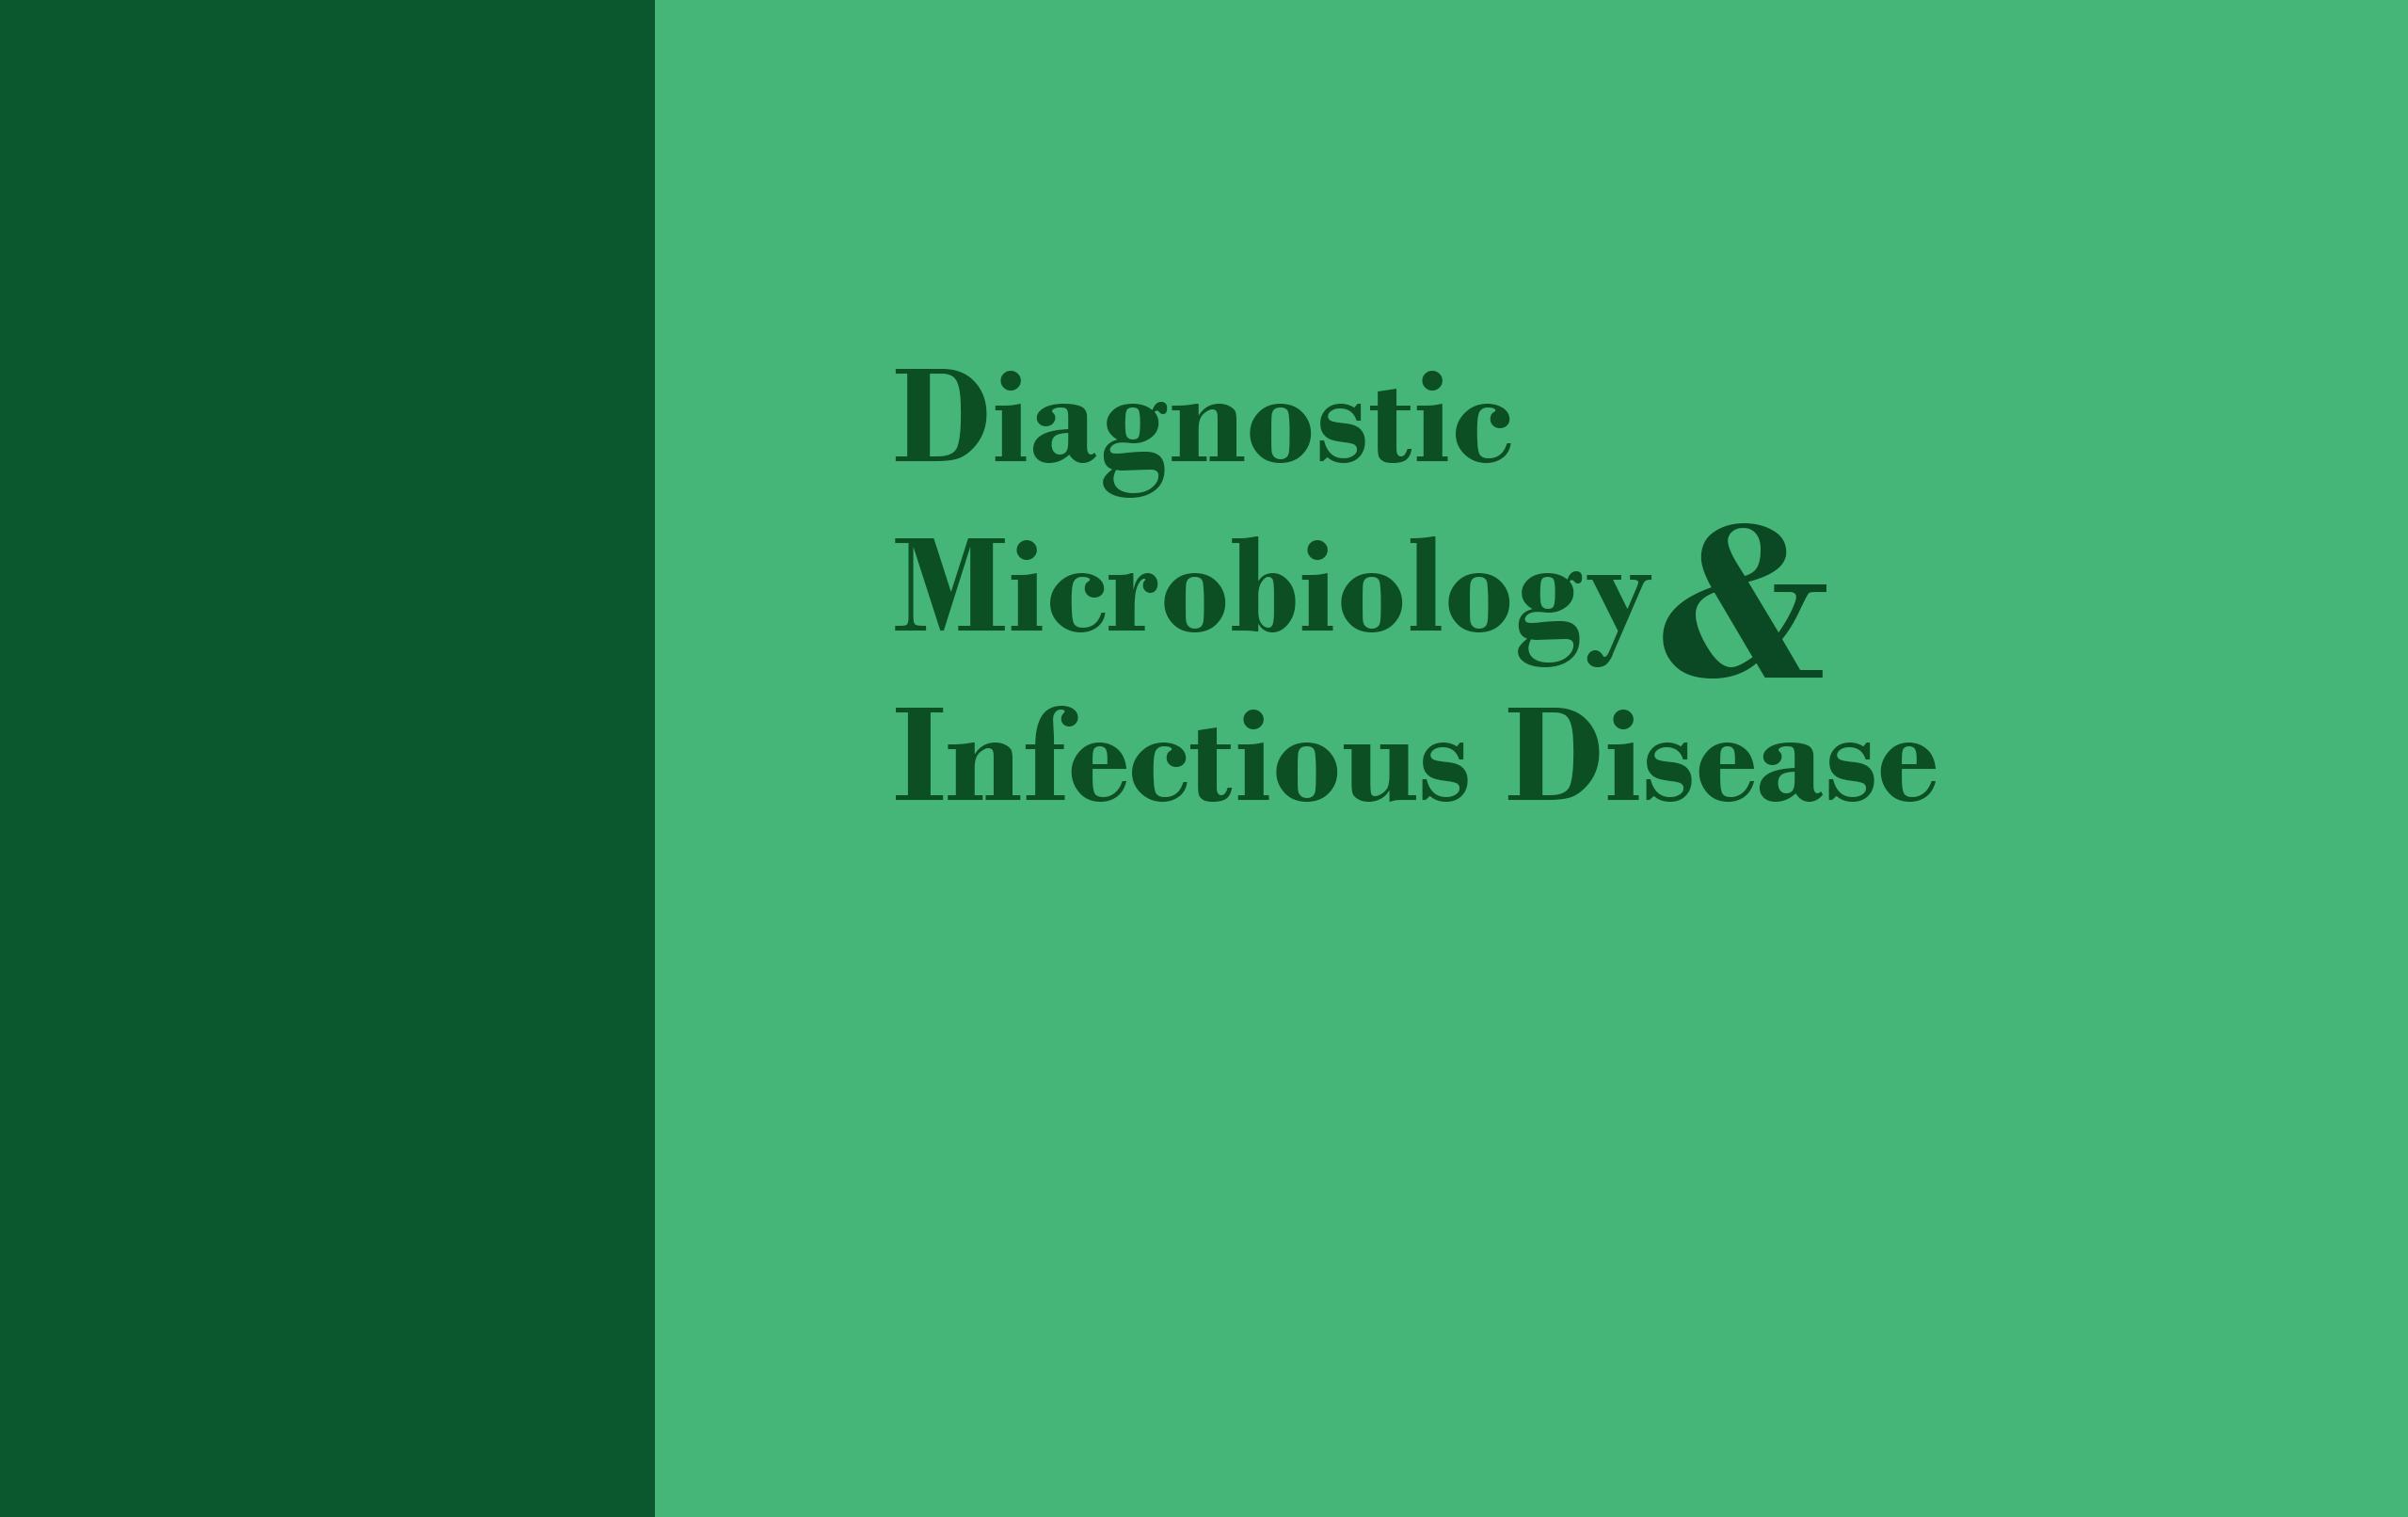 Diagnostic Microbiolody and infectious Diseases